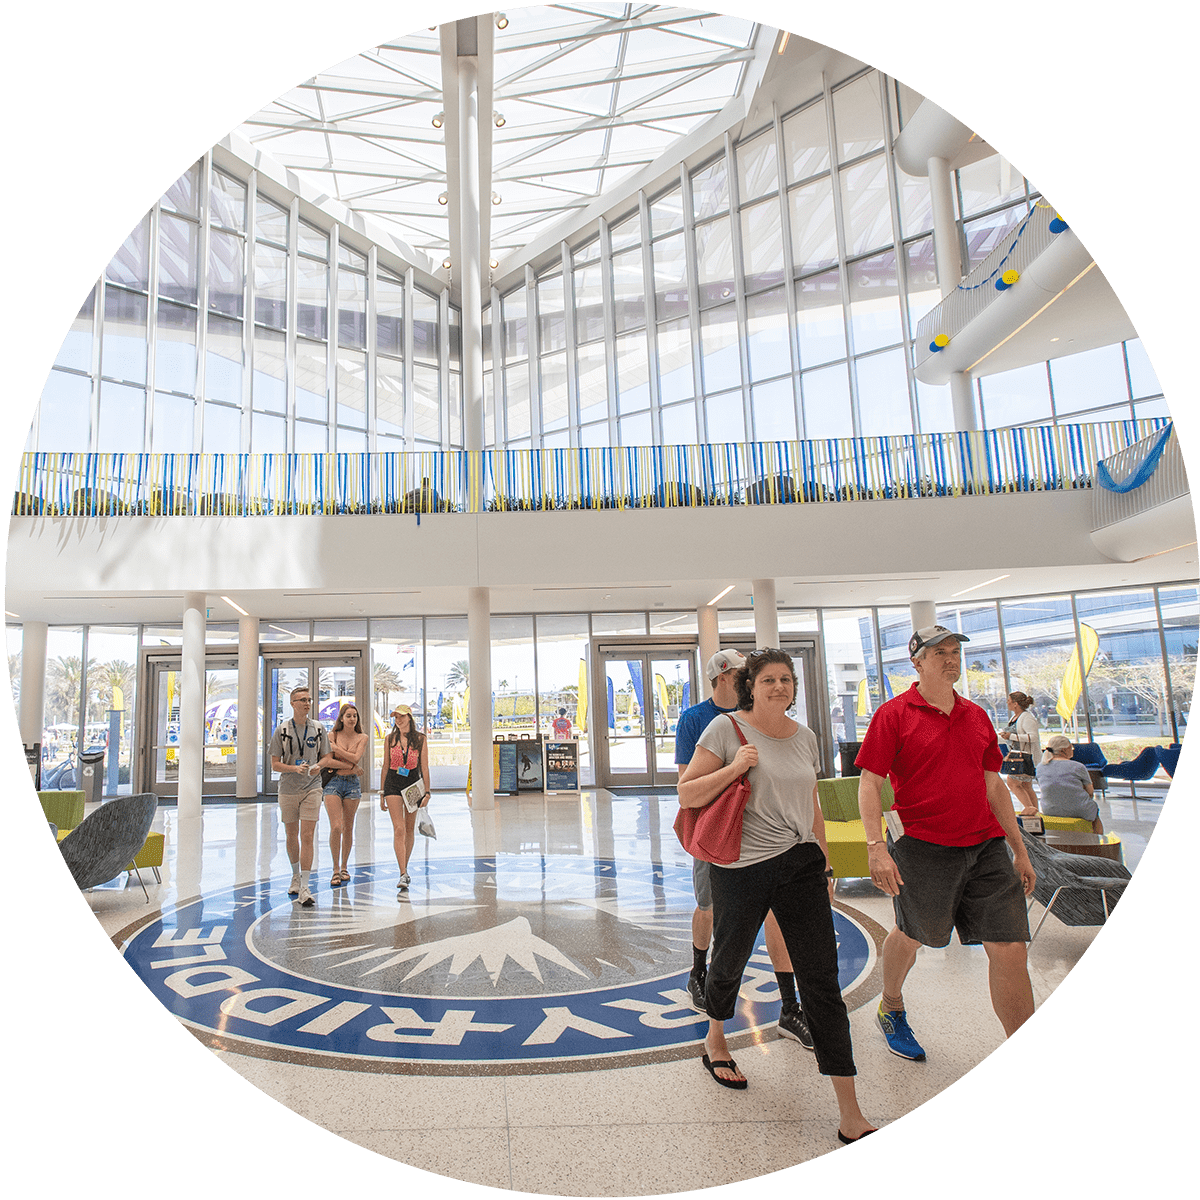 Parents and students tour campus and talk to faculty and staff during Preview Day, Embry-Riddle Aeronautical University, Daytona Beach Campus, Daytona Beach, March 30, 2019. (Embry-Riddle/David Massey)